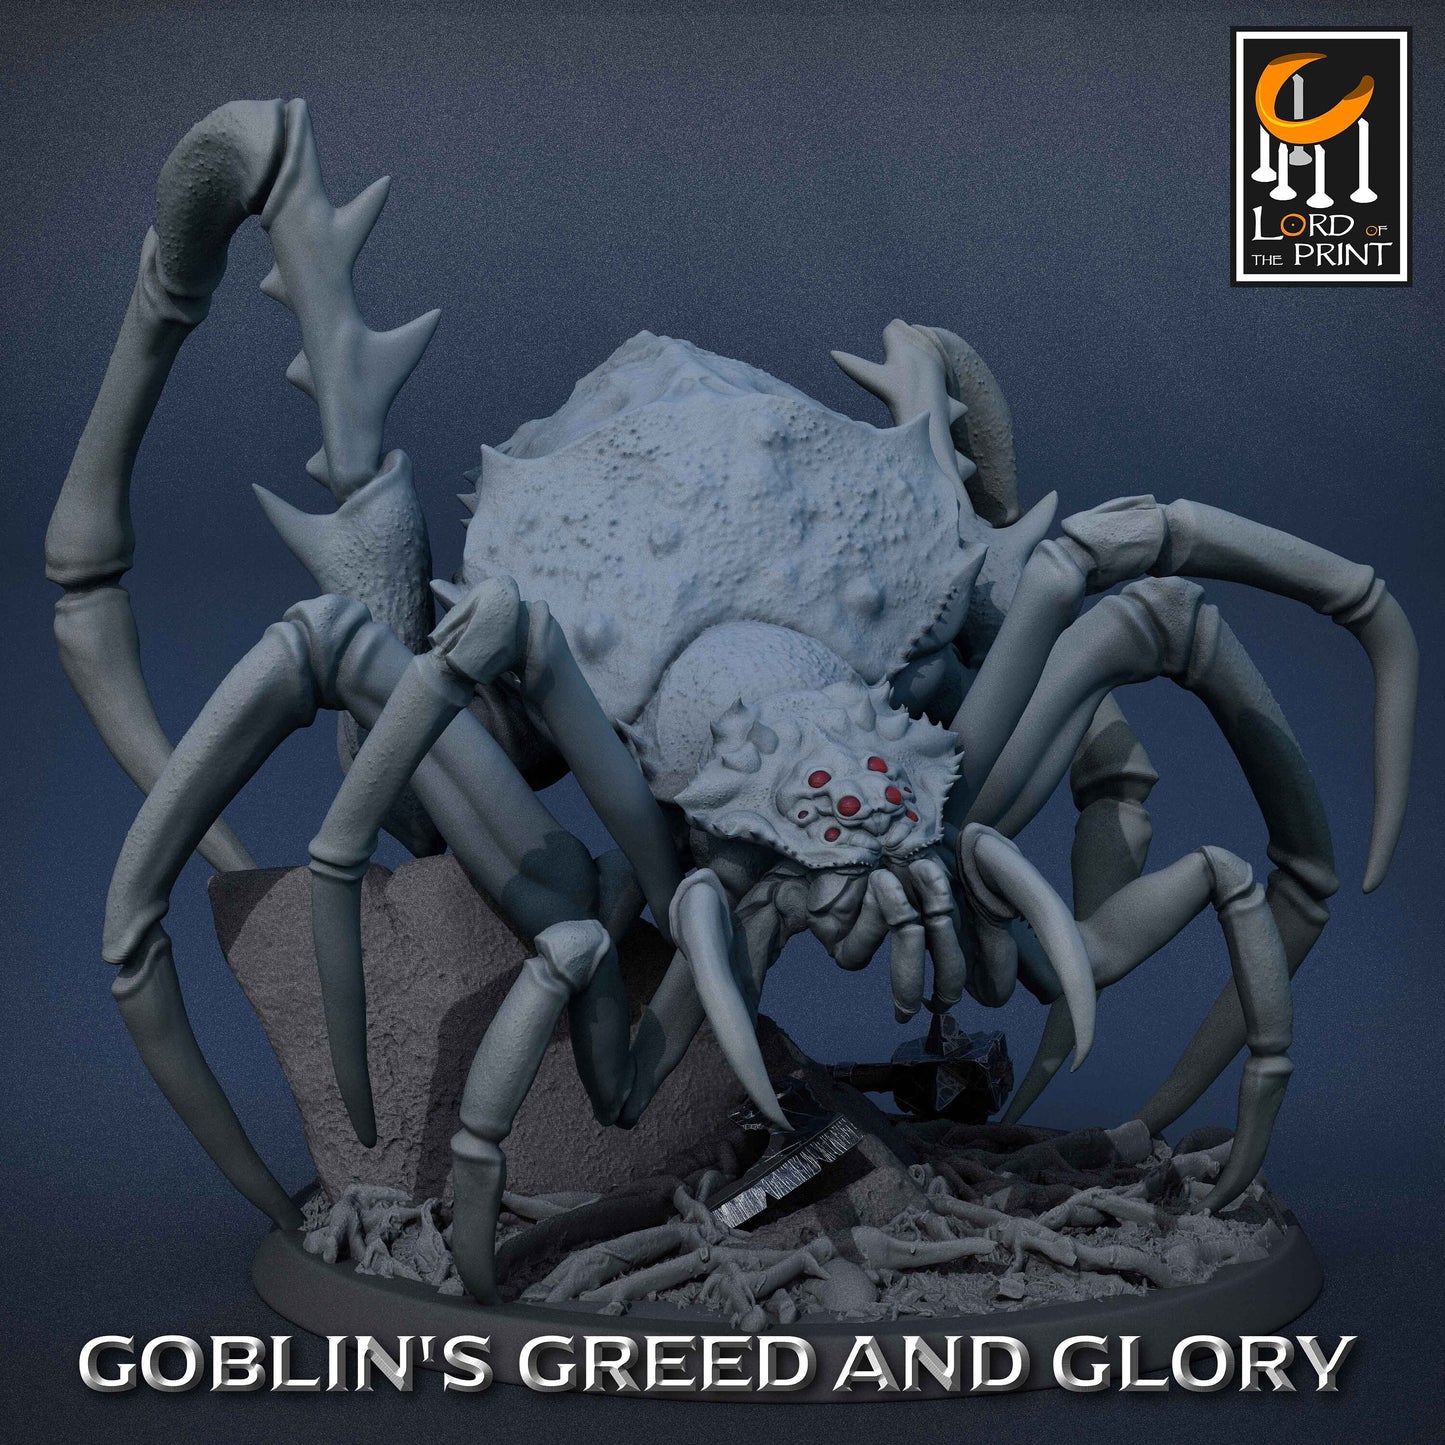 Goblin Spider Riders A | RPG Miniature for Dungeons and Dragons|Pathfinder|Tabletop Wargaming | Goblin Miniature | Lord of the Print